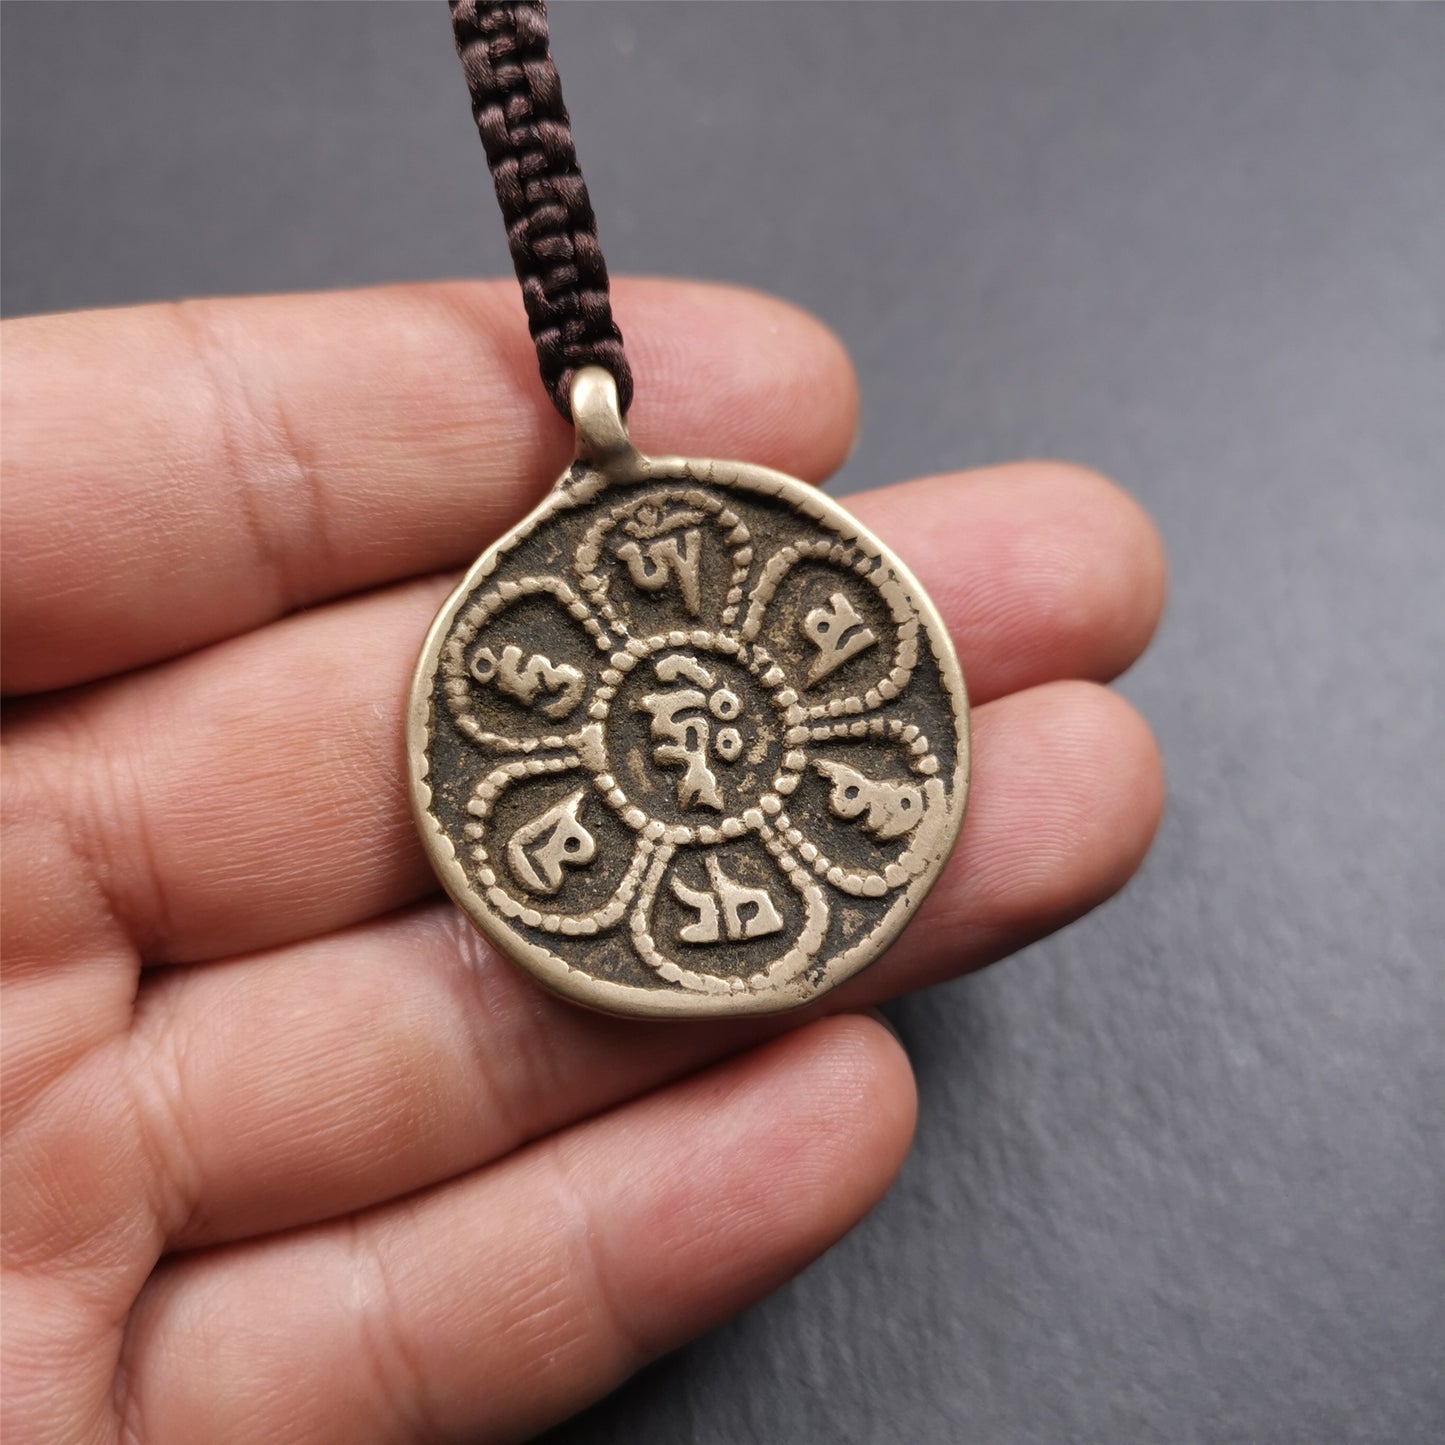 This badge was made by Tibetan craftsmen and come from Hepo Town, Baiyu County, the birthplace of the famous Tibetan handicrafts. It is round badge,made of brass, 1.38 inches,carved with mantra of chenrezig OM MANI PADME HUM.